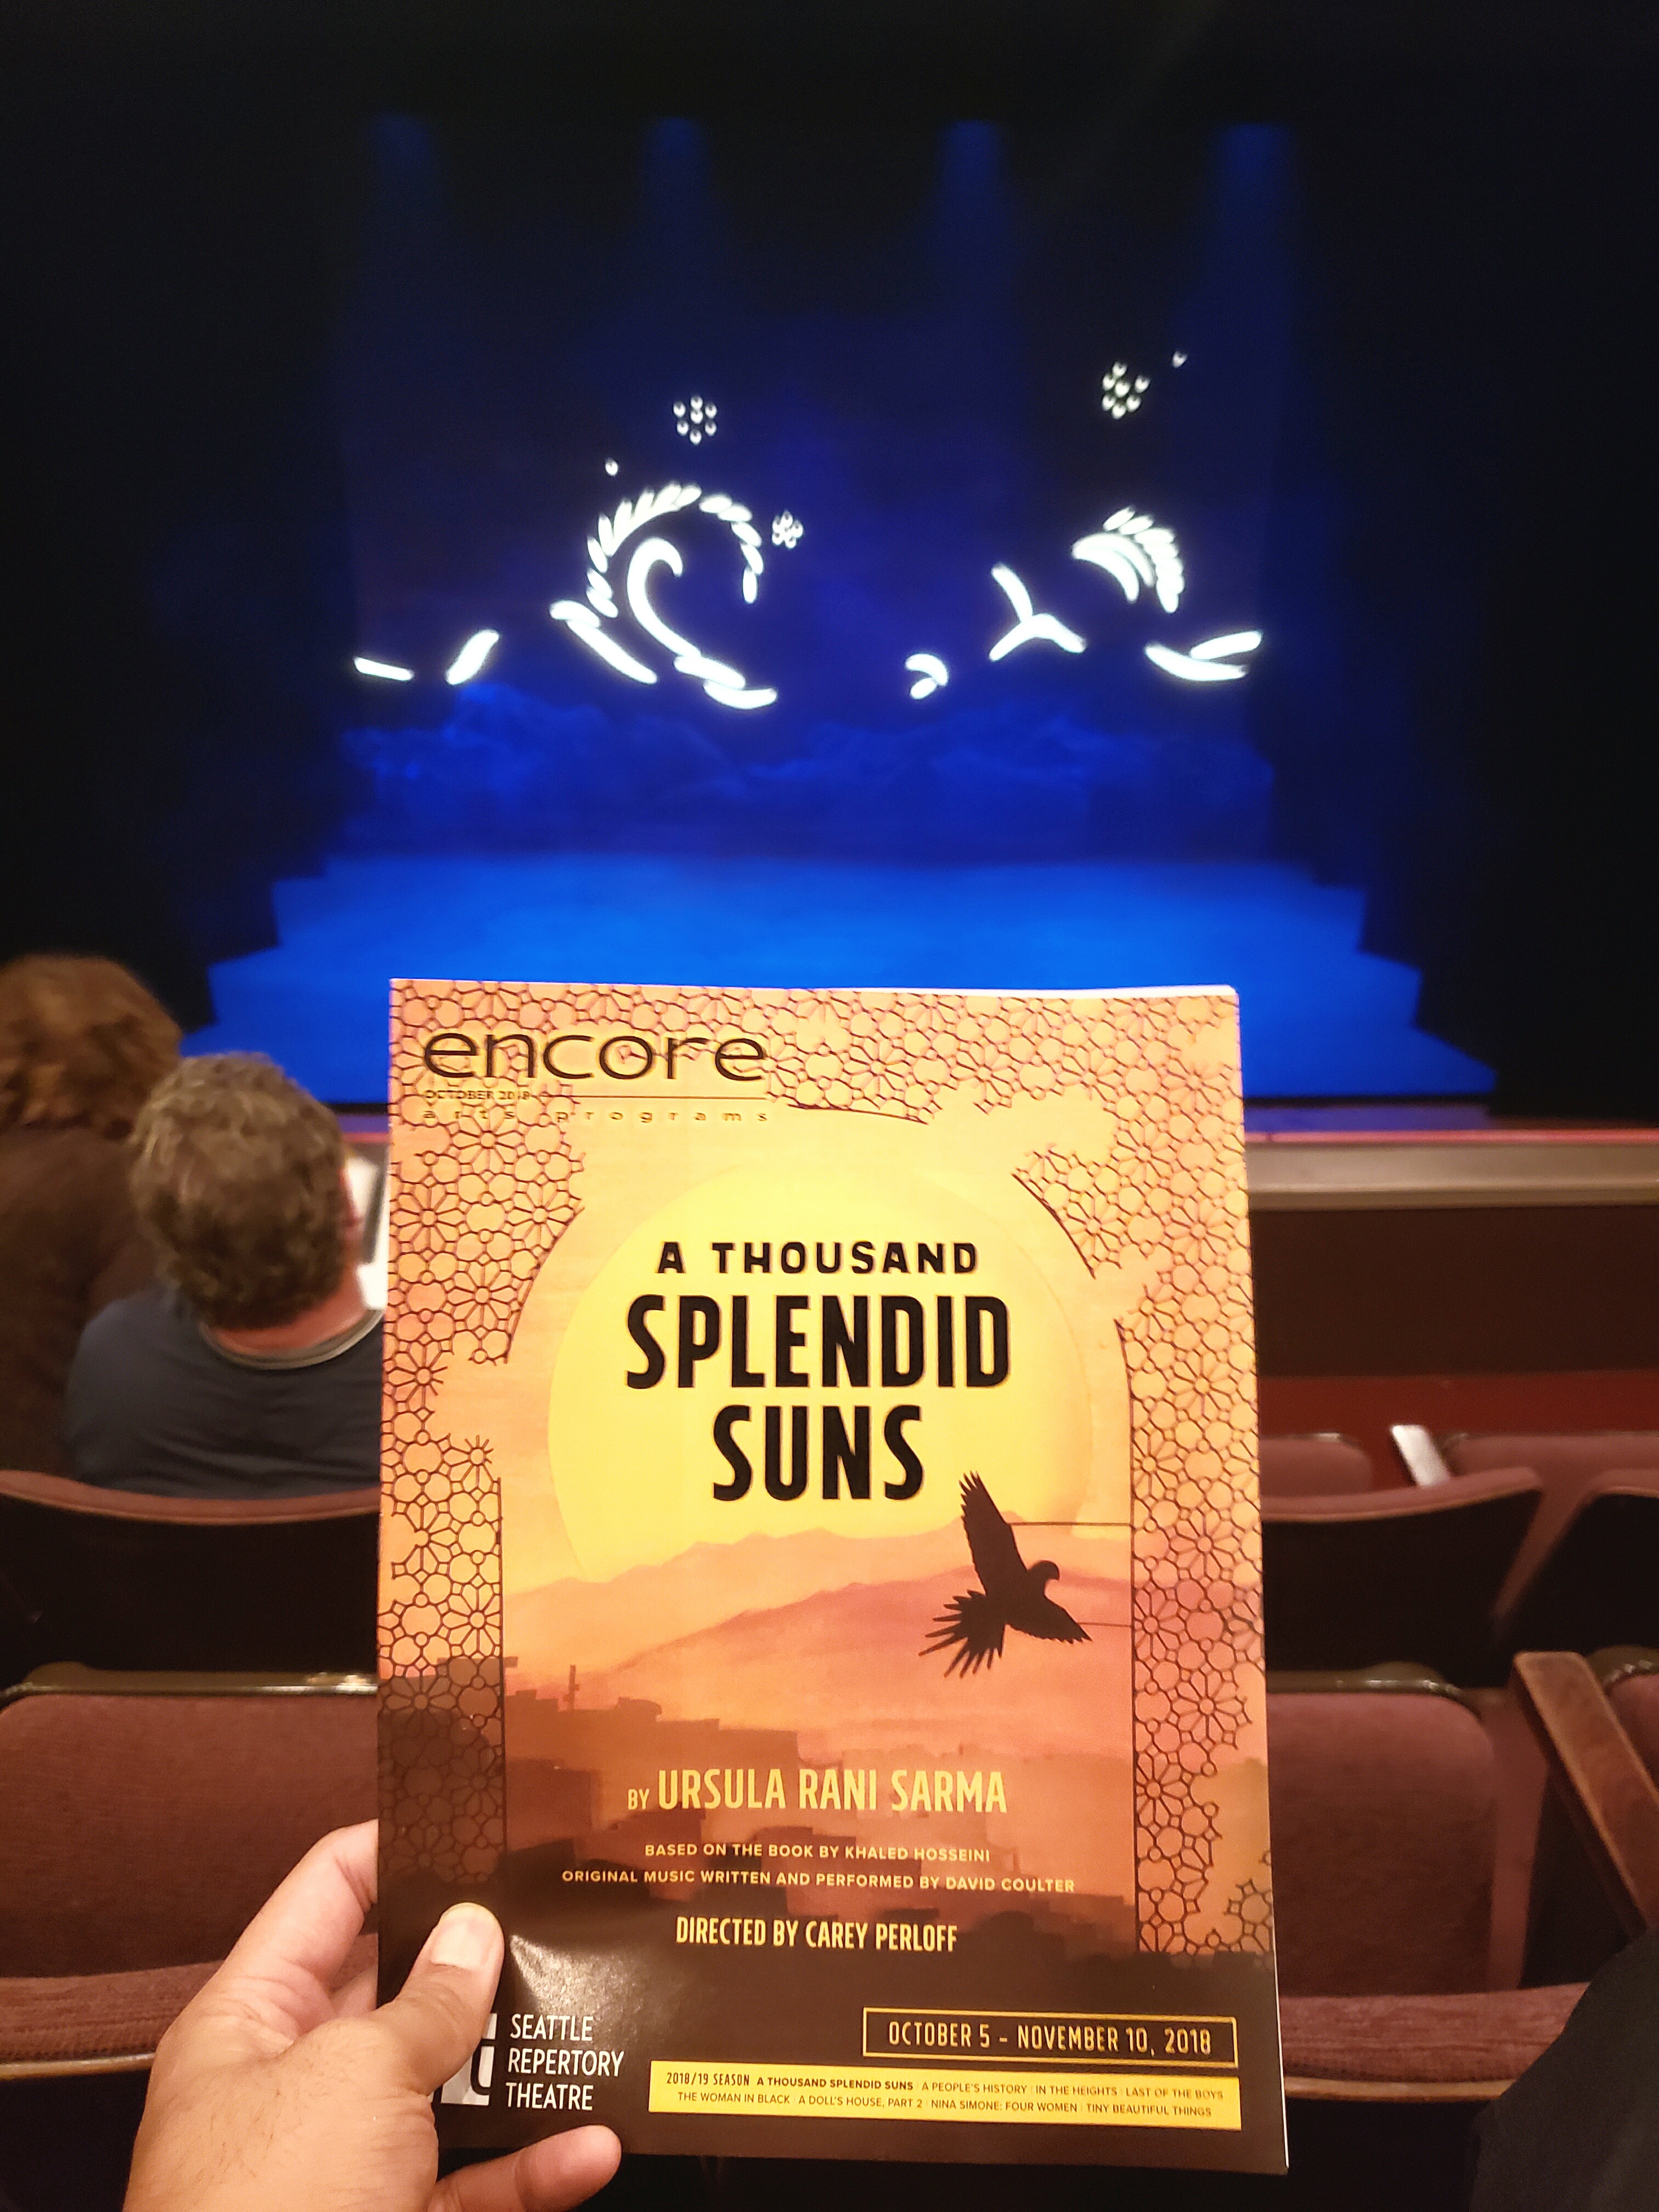 Attended the stage play adaptation of A Thousand Splendid Suns. The portrayal of misogynist tyranny in Afganistan was like watching a Taliban Lifetime special (in a good way). Guys are born with so much privilege.